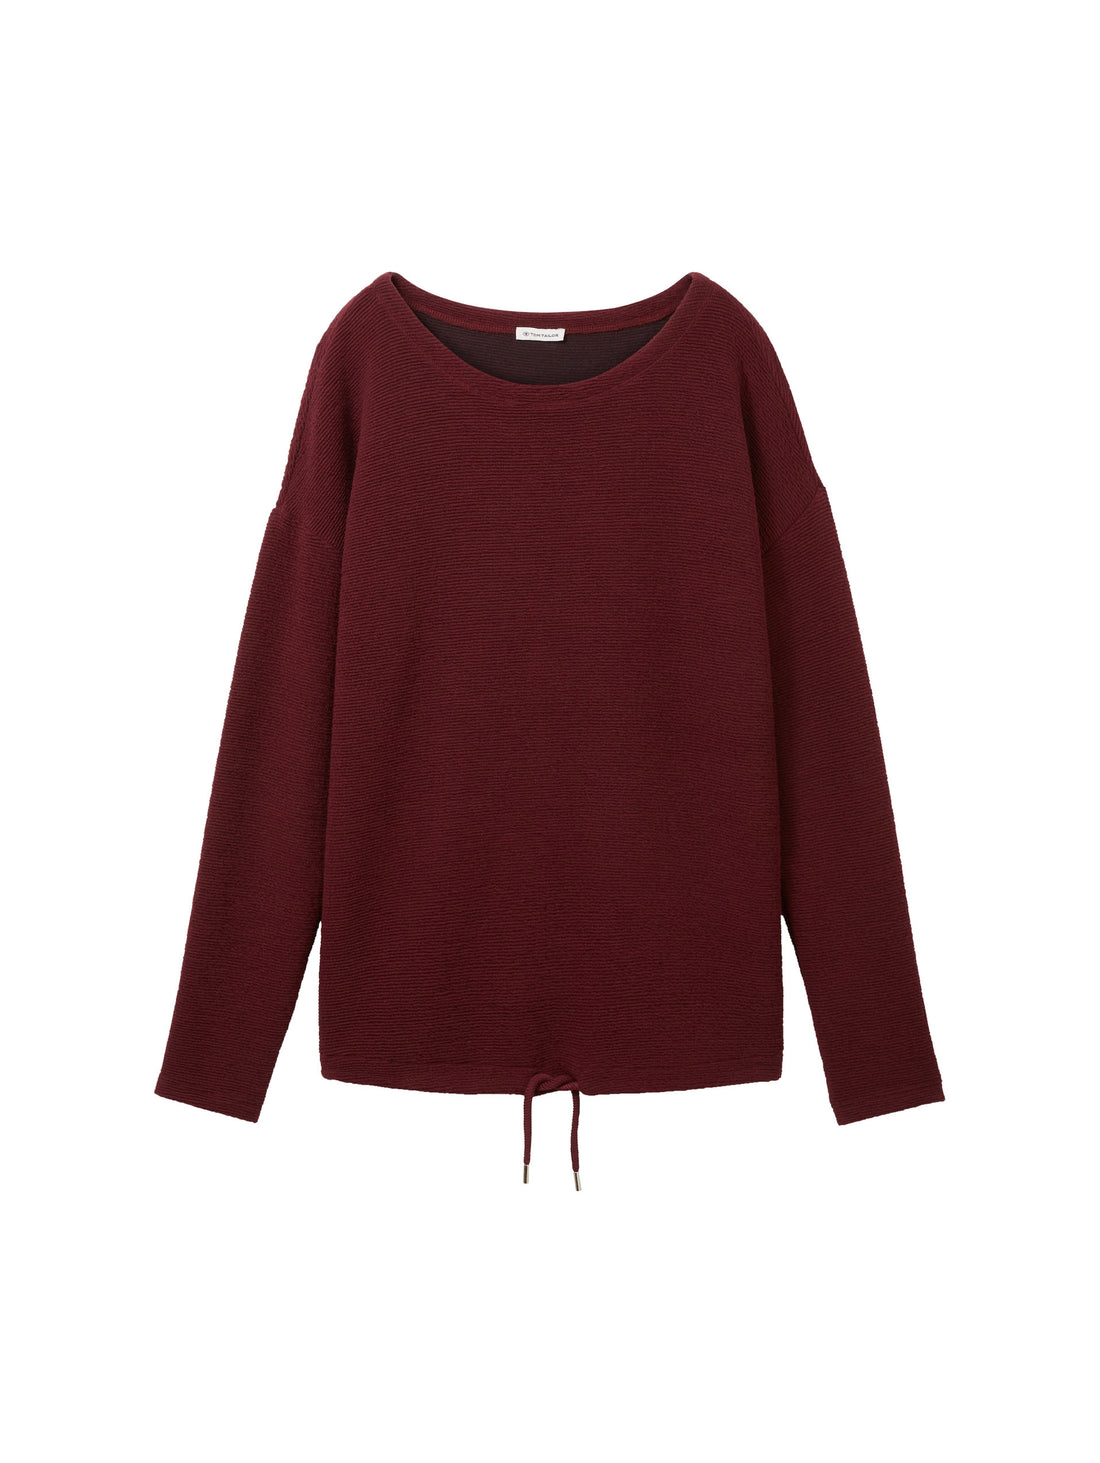 Long Sleeve T Shirt With Wide Round Neckline_1038177_10308_01